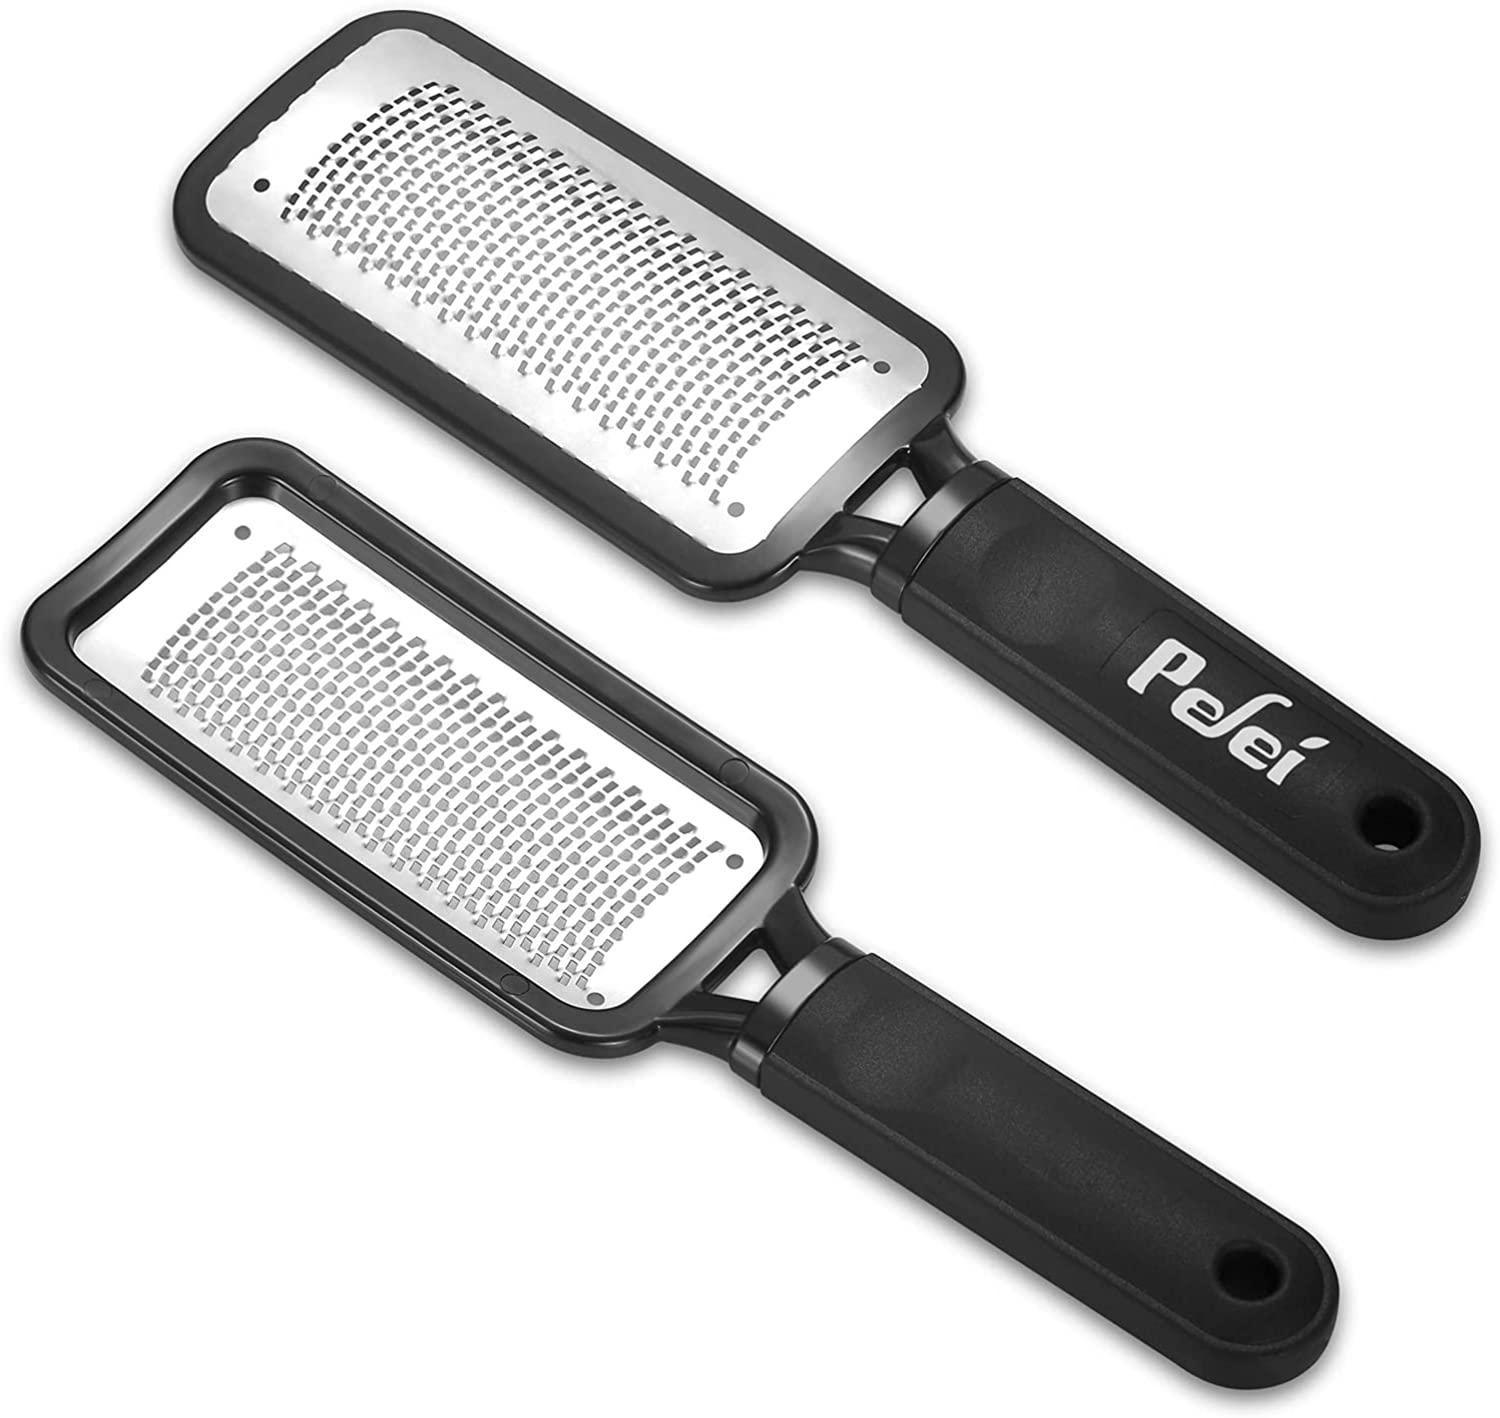 Professional Stainless Steel Foot Files For Hard Skin - Includes